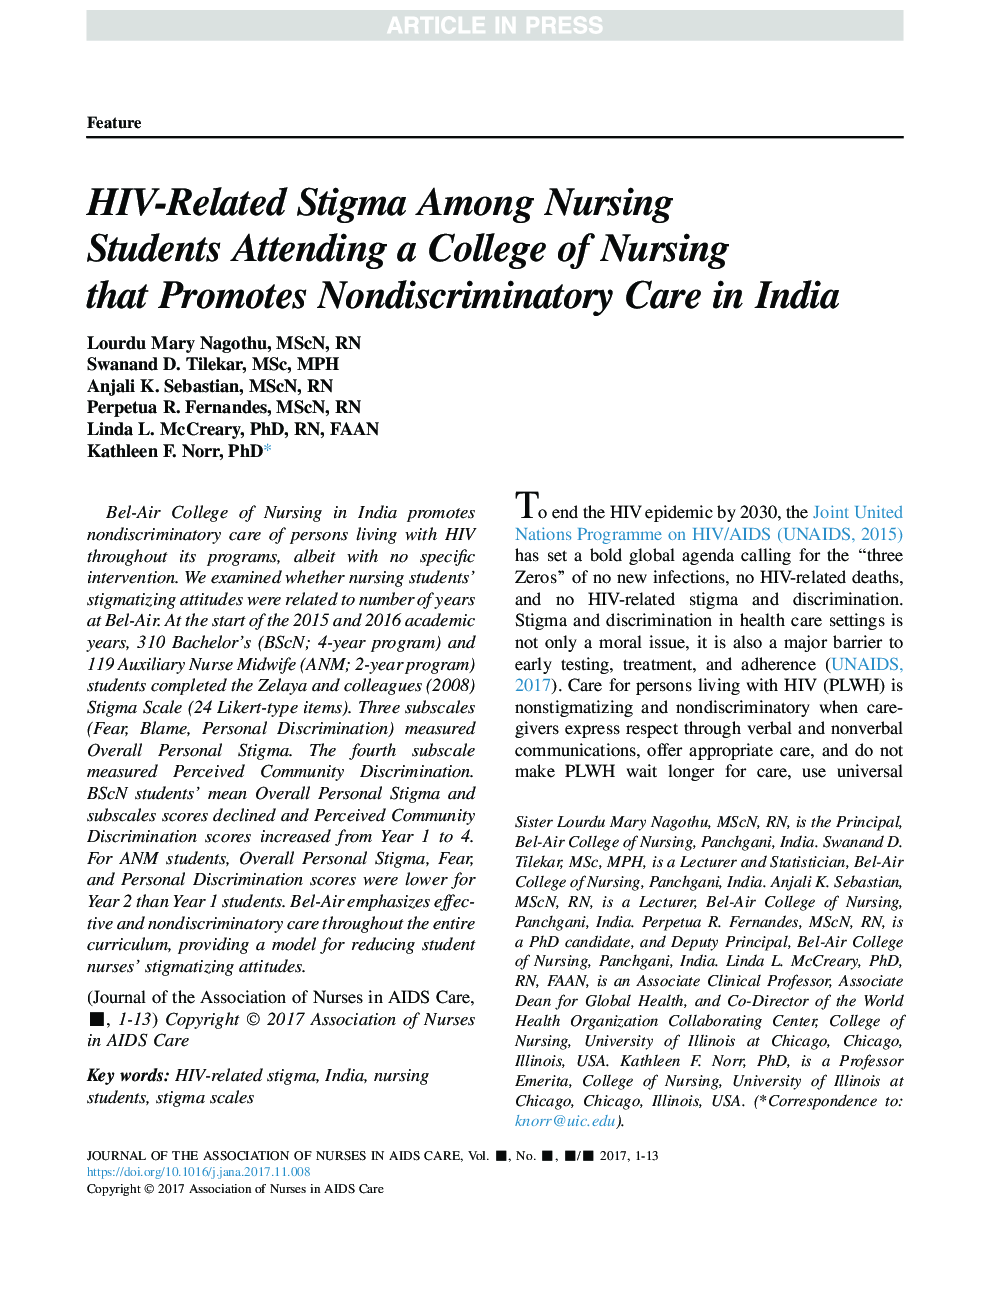 HIV-Related Stigma Among Nursing Students Attending a College of Nursing that Promotes Nondiscriminatory Care in India